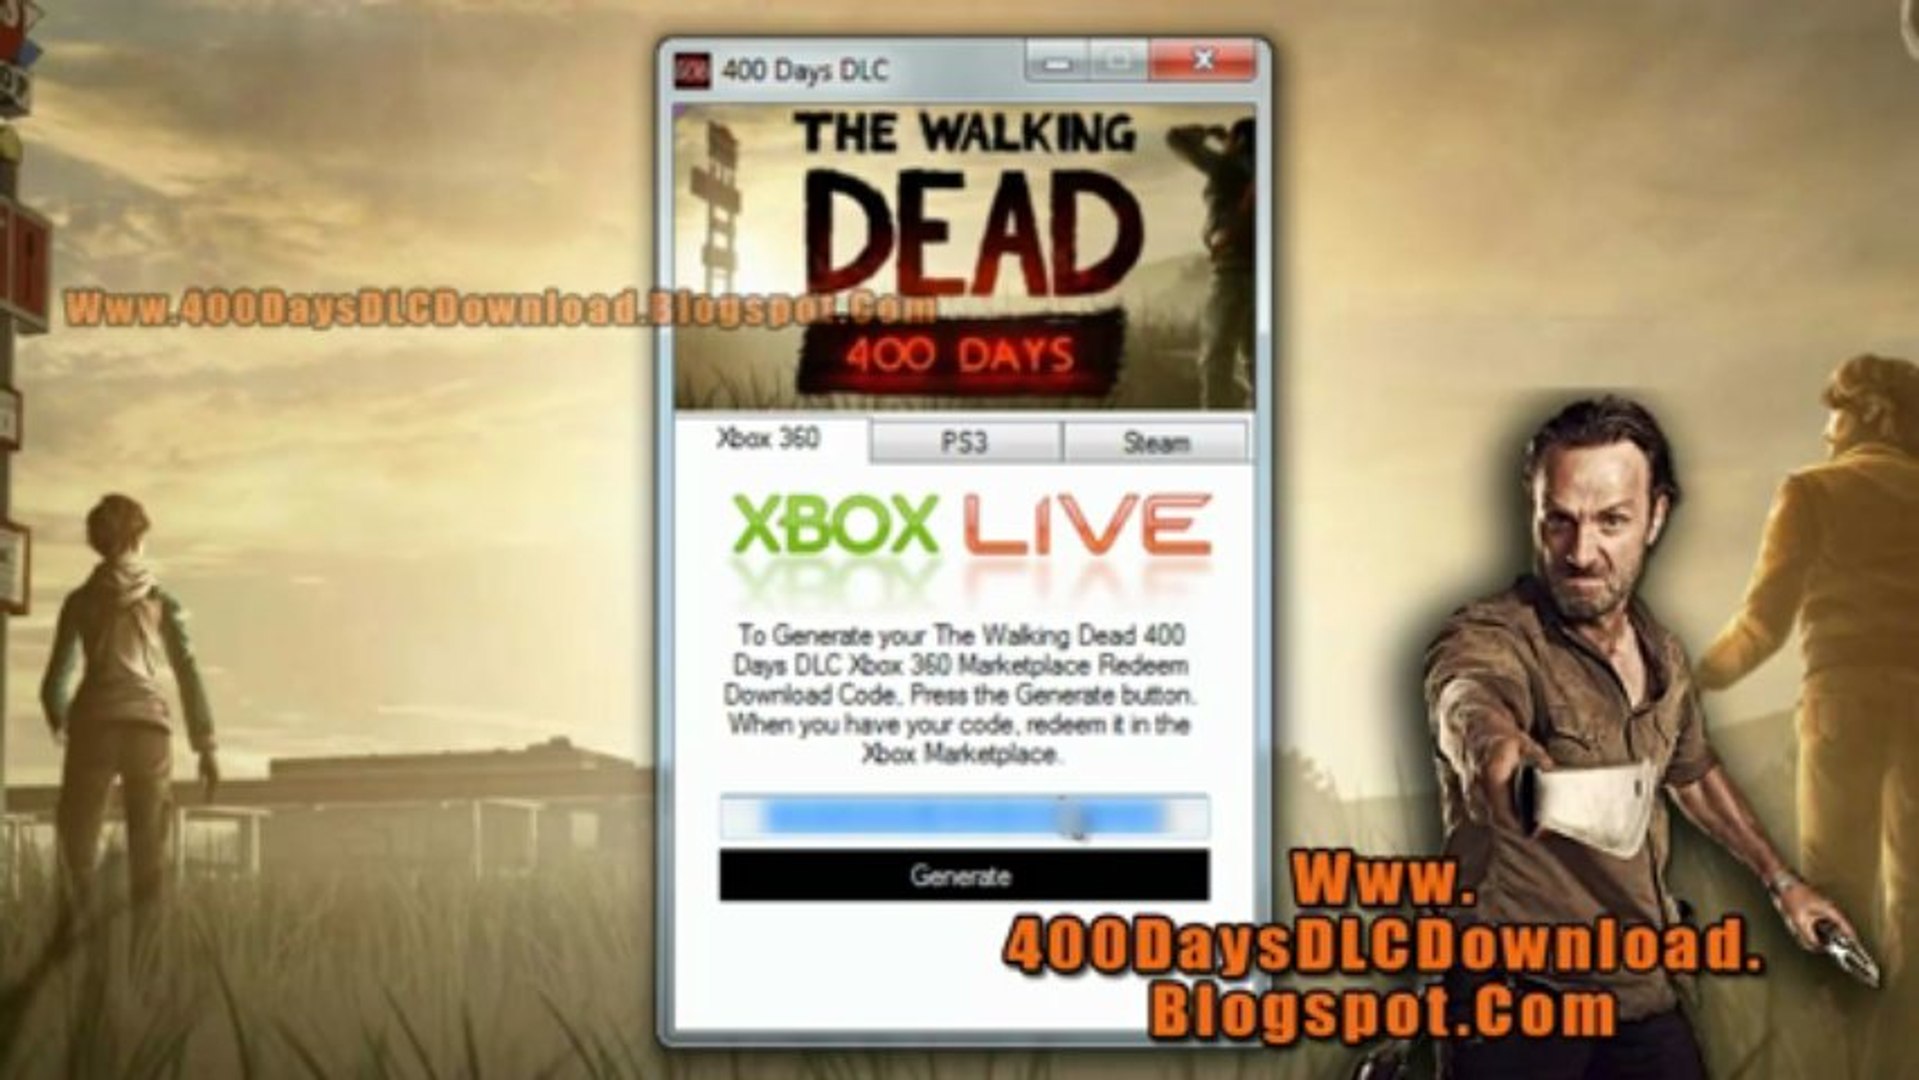 How to Get The Walking Dead 400 Days DLC Free!! - video Dailymotion